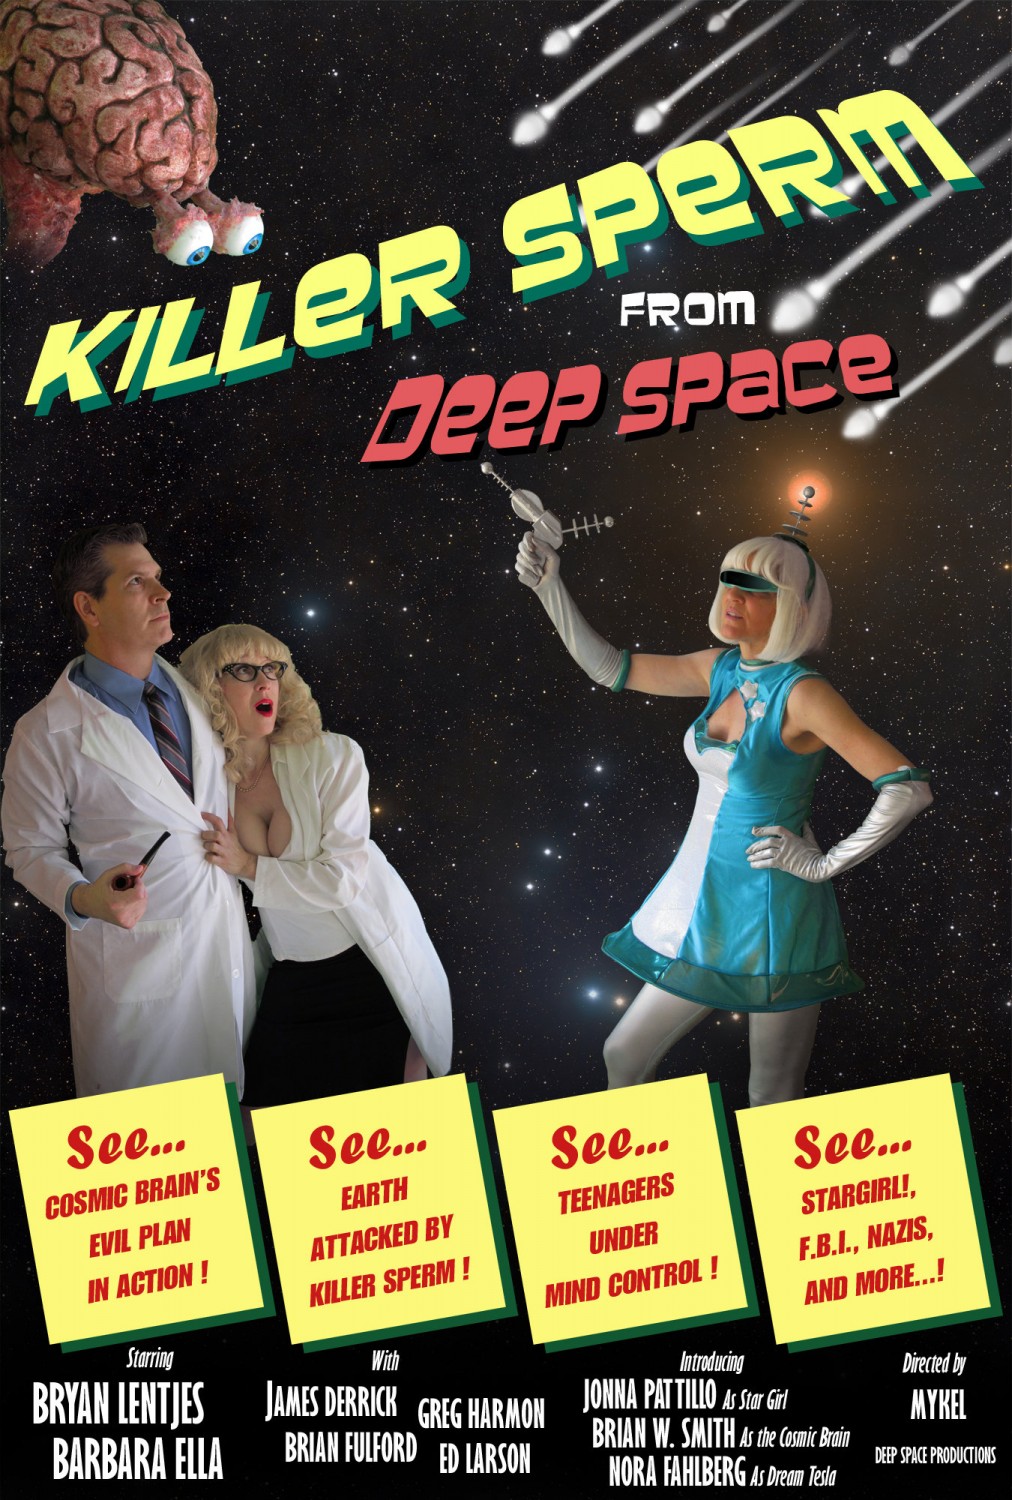 Extra Large Movie Poster Image for Killer Sperm from Deep Space